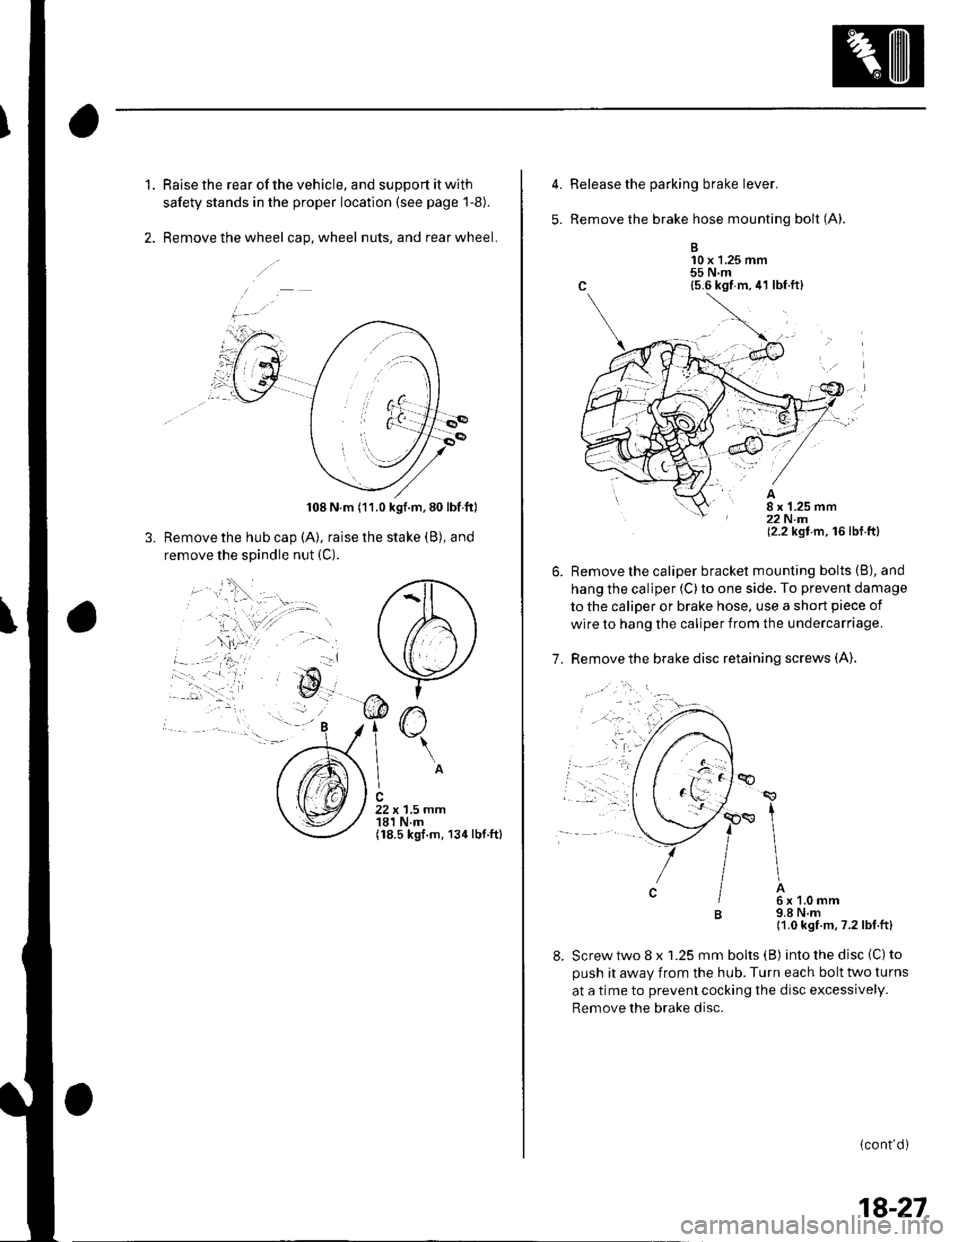 HONDA CIVIC 2003 7.G Workshop Manual 1.Raise the rear of the vehicle, and support it with
safety stands in the proper location (see page l-8).
Remove the wheel cap. wheel nuts, and rear wheel.
108 N.m (11.0 kgf.m,80 lbf ftl
Remove the h